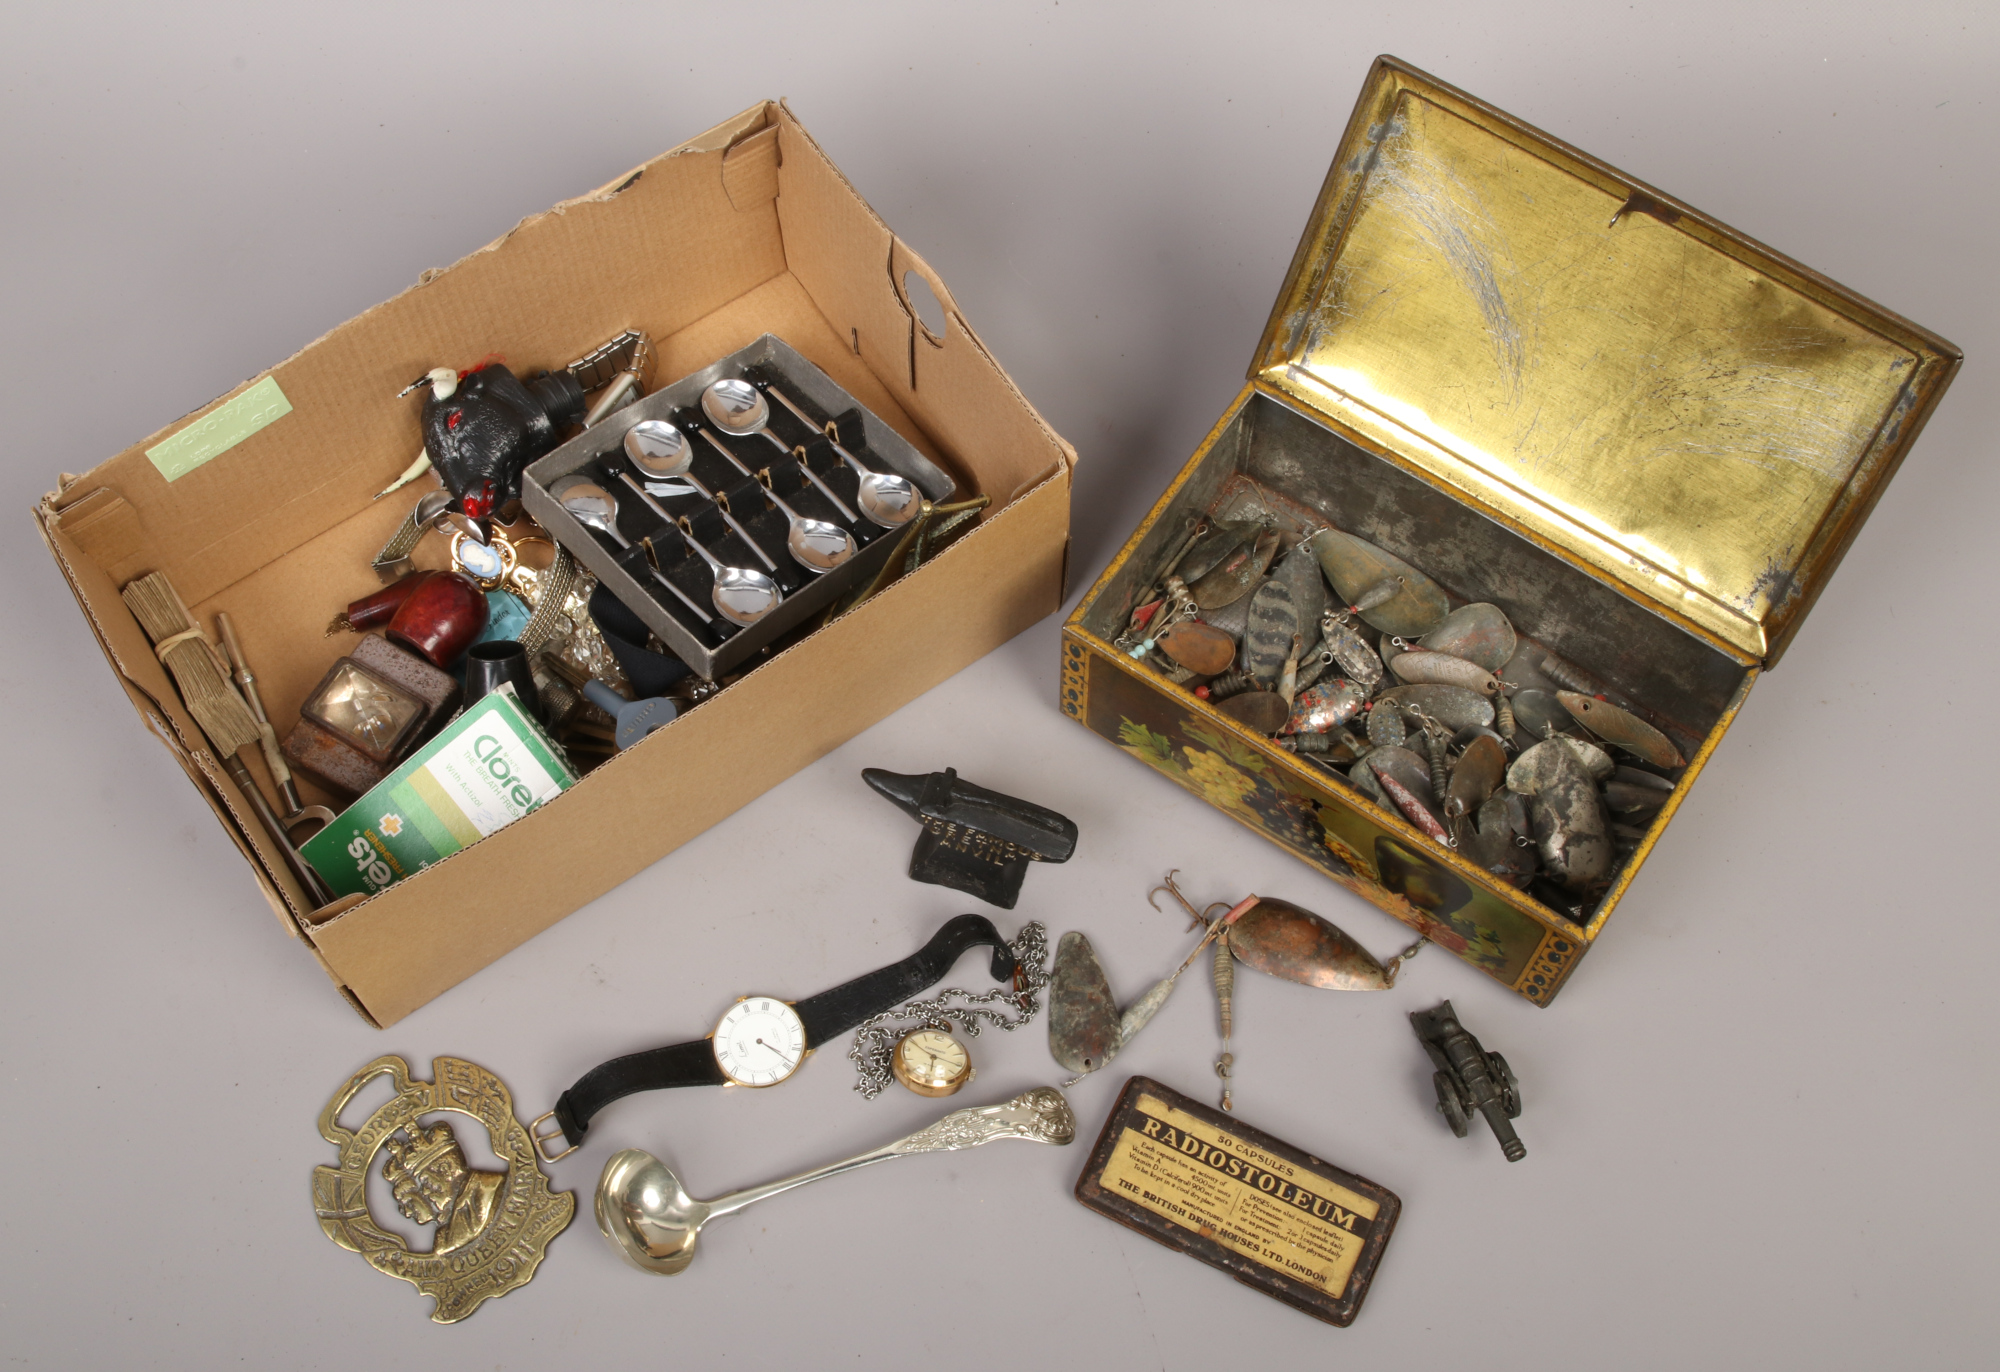 A box of collectables to include fishing spinners / weights, demitasse spoons, wristwatches etc.